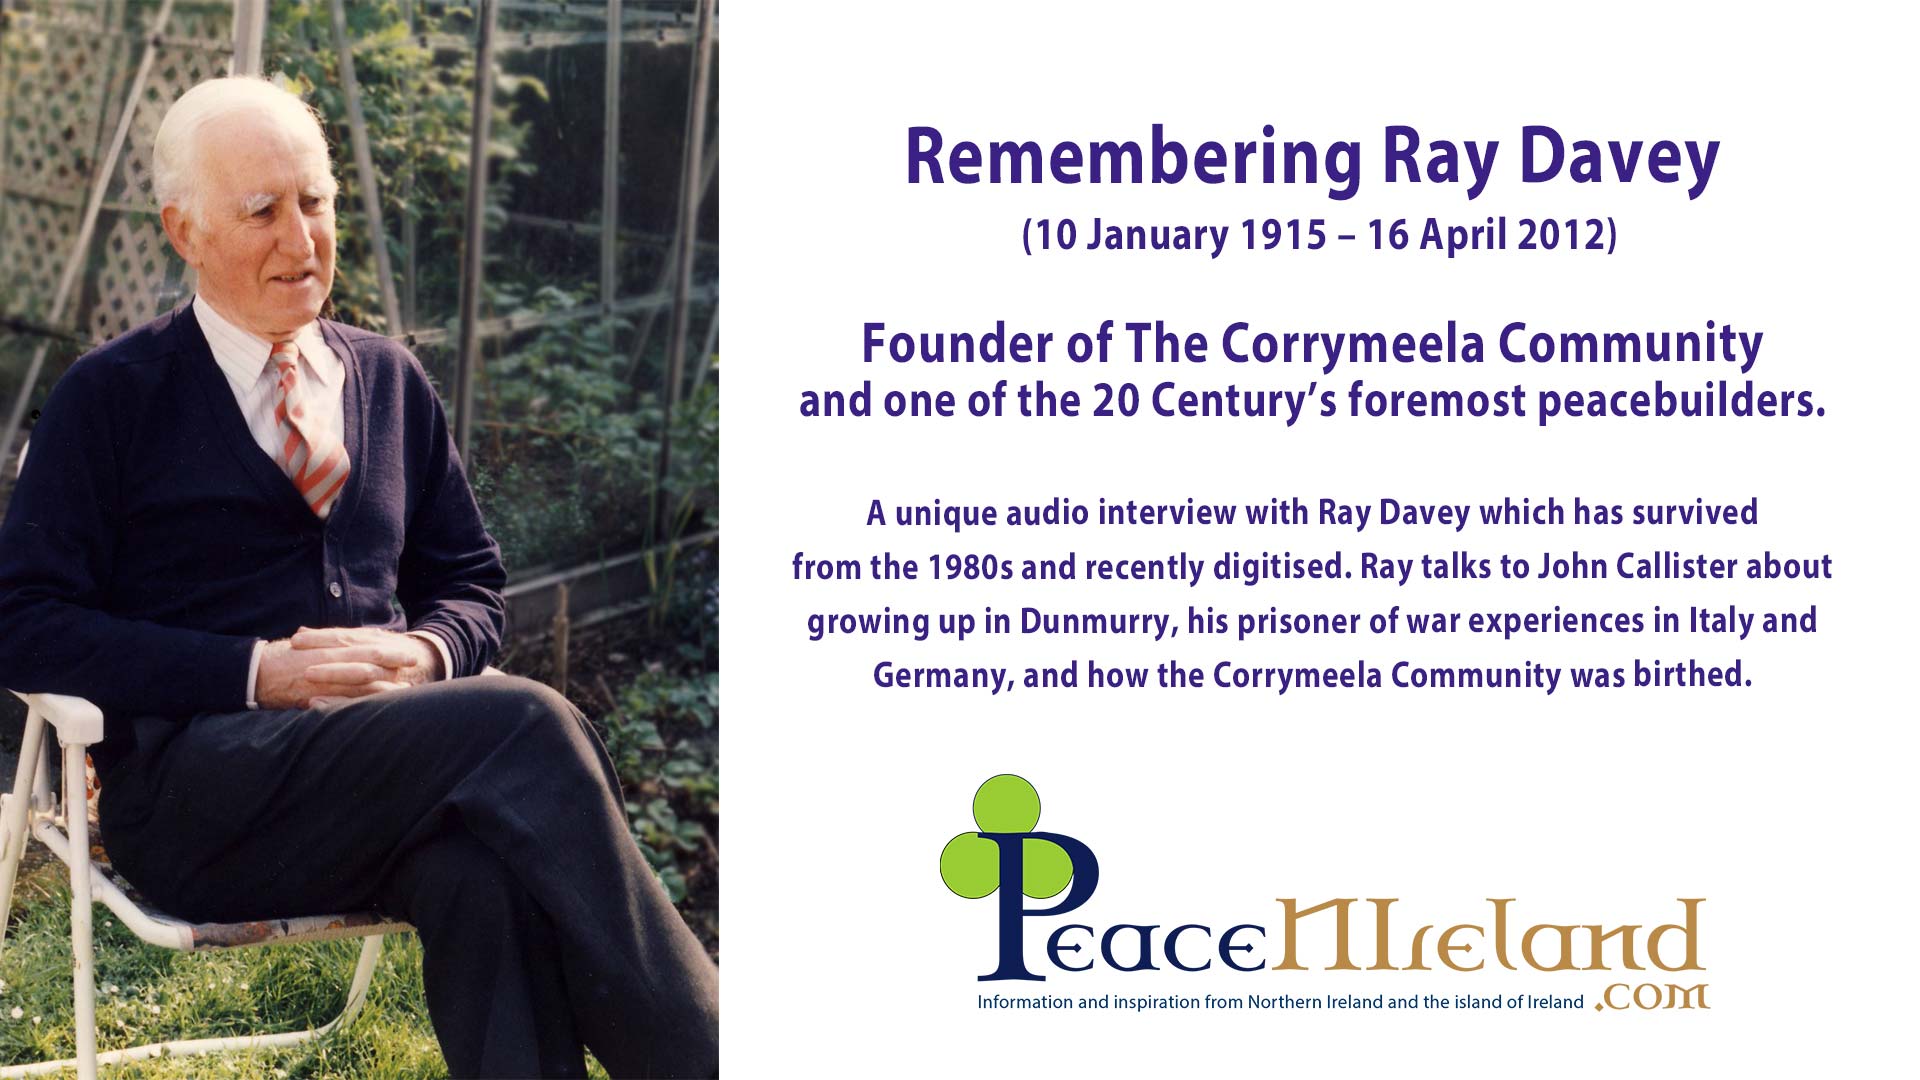 Celebrating the life of Ray Davey to mark the anniversary of his passing (Friday 16th April 2021).